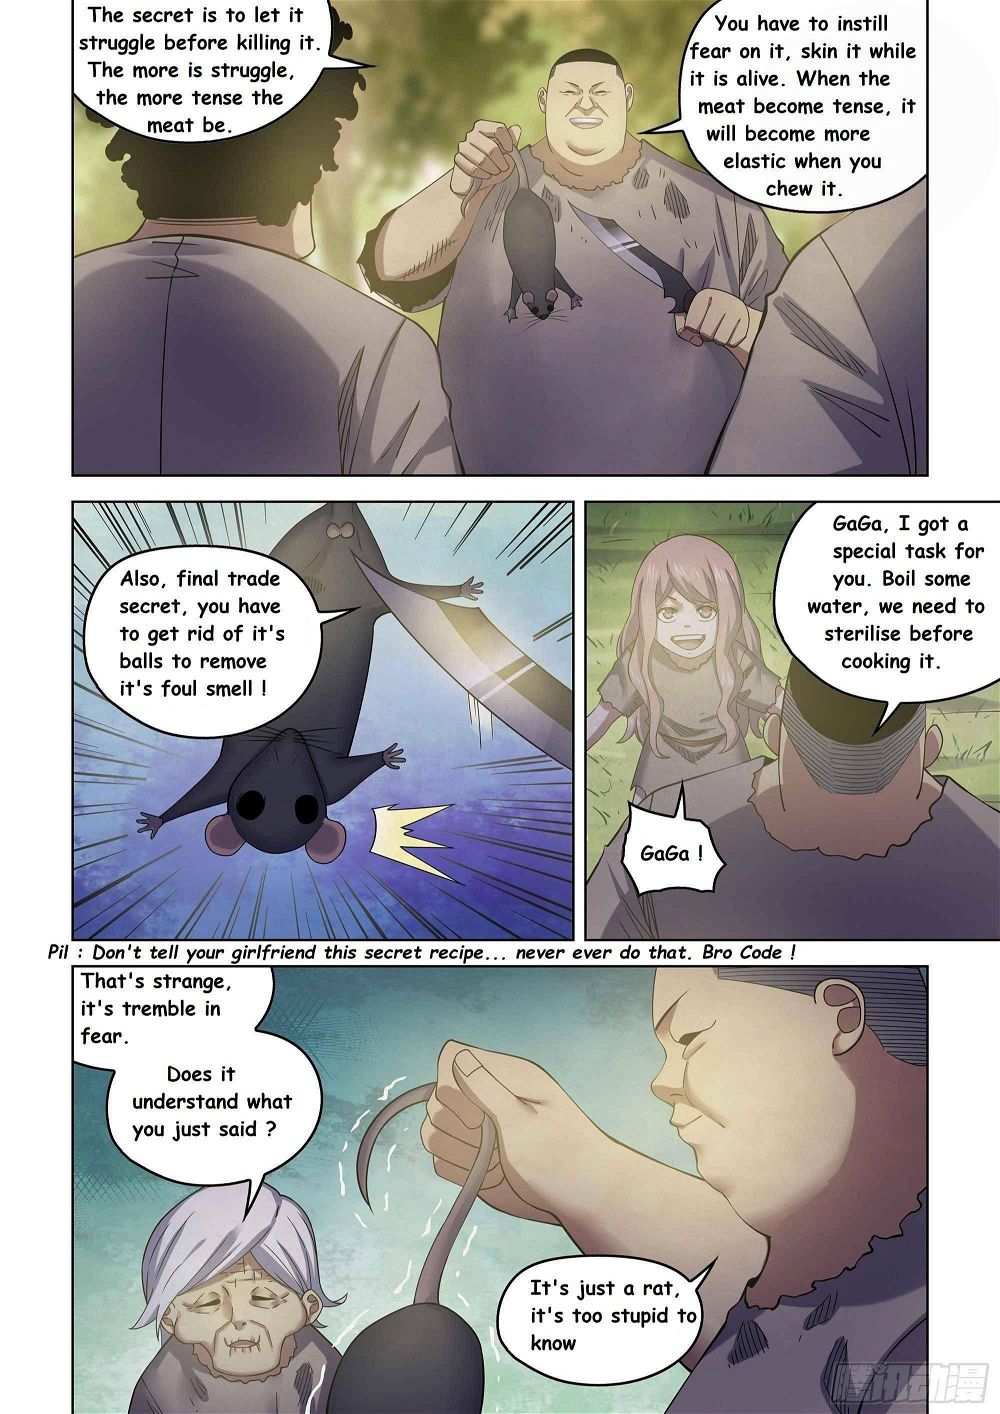 The Last Human Chapter 417 - Page 3